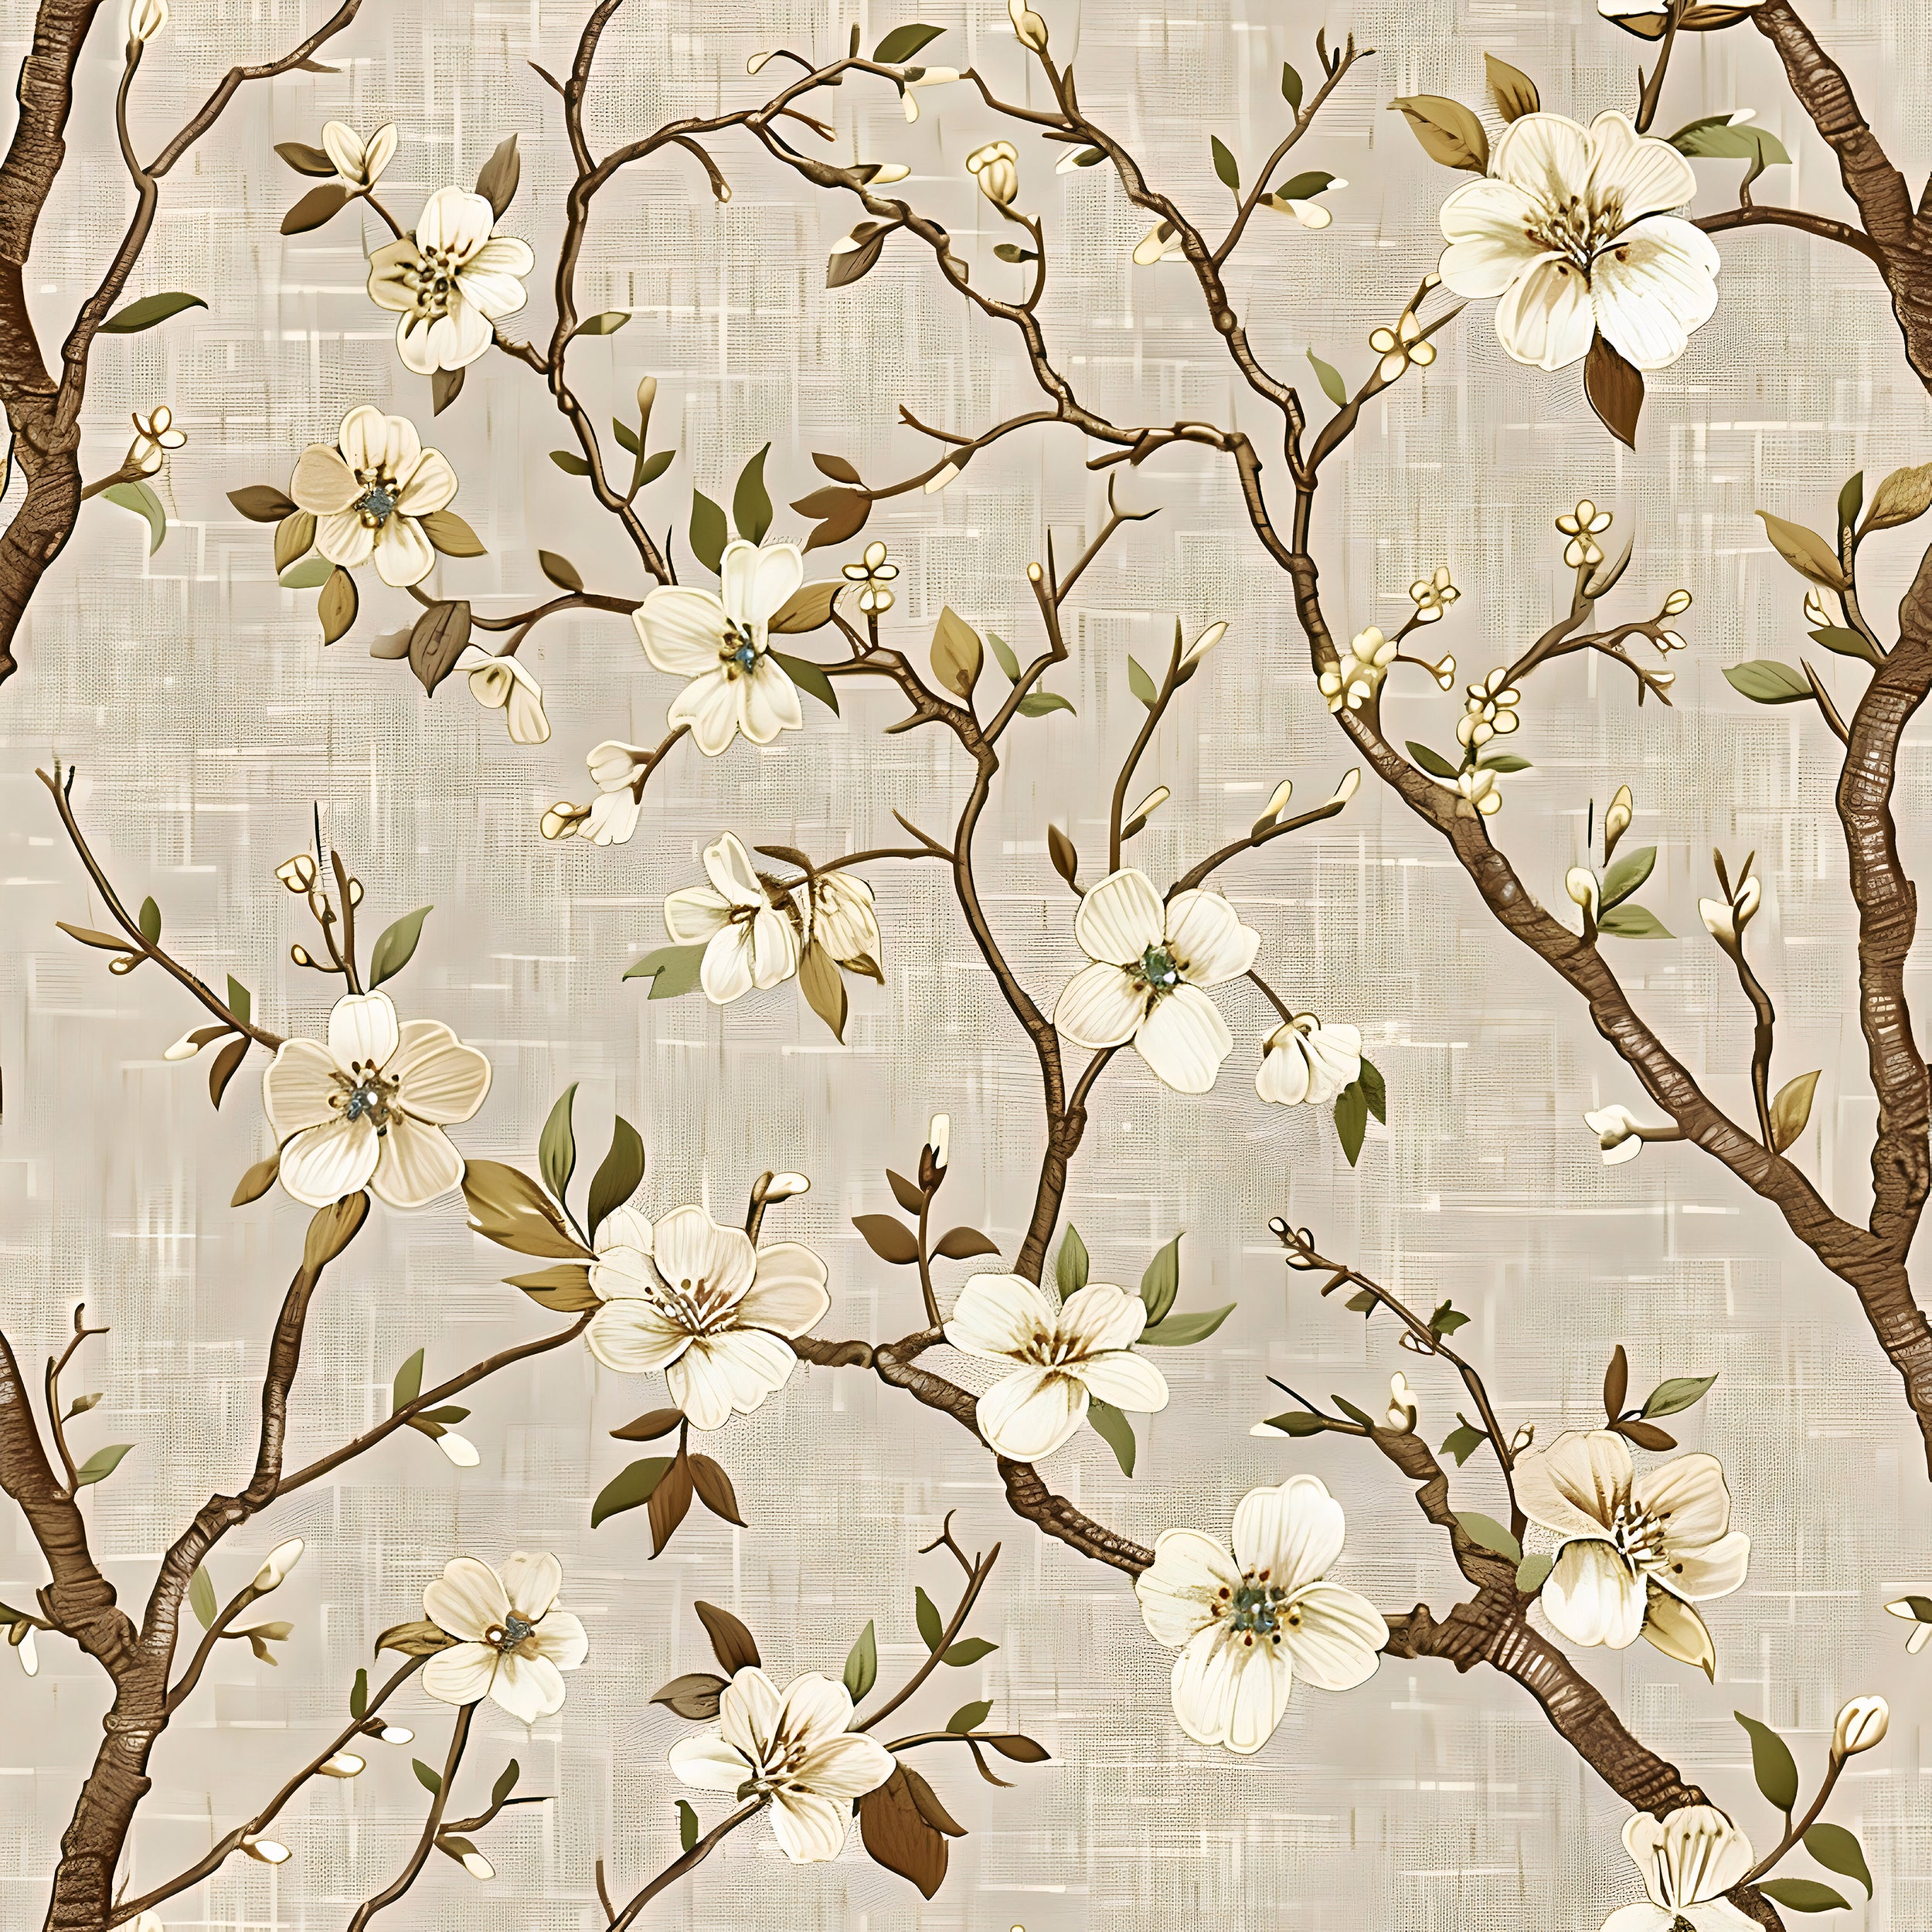 Peel and stick beige floral wall decor Removable soft beige botanical wallpaper